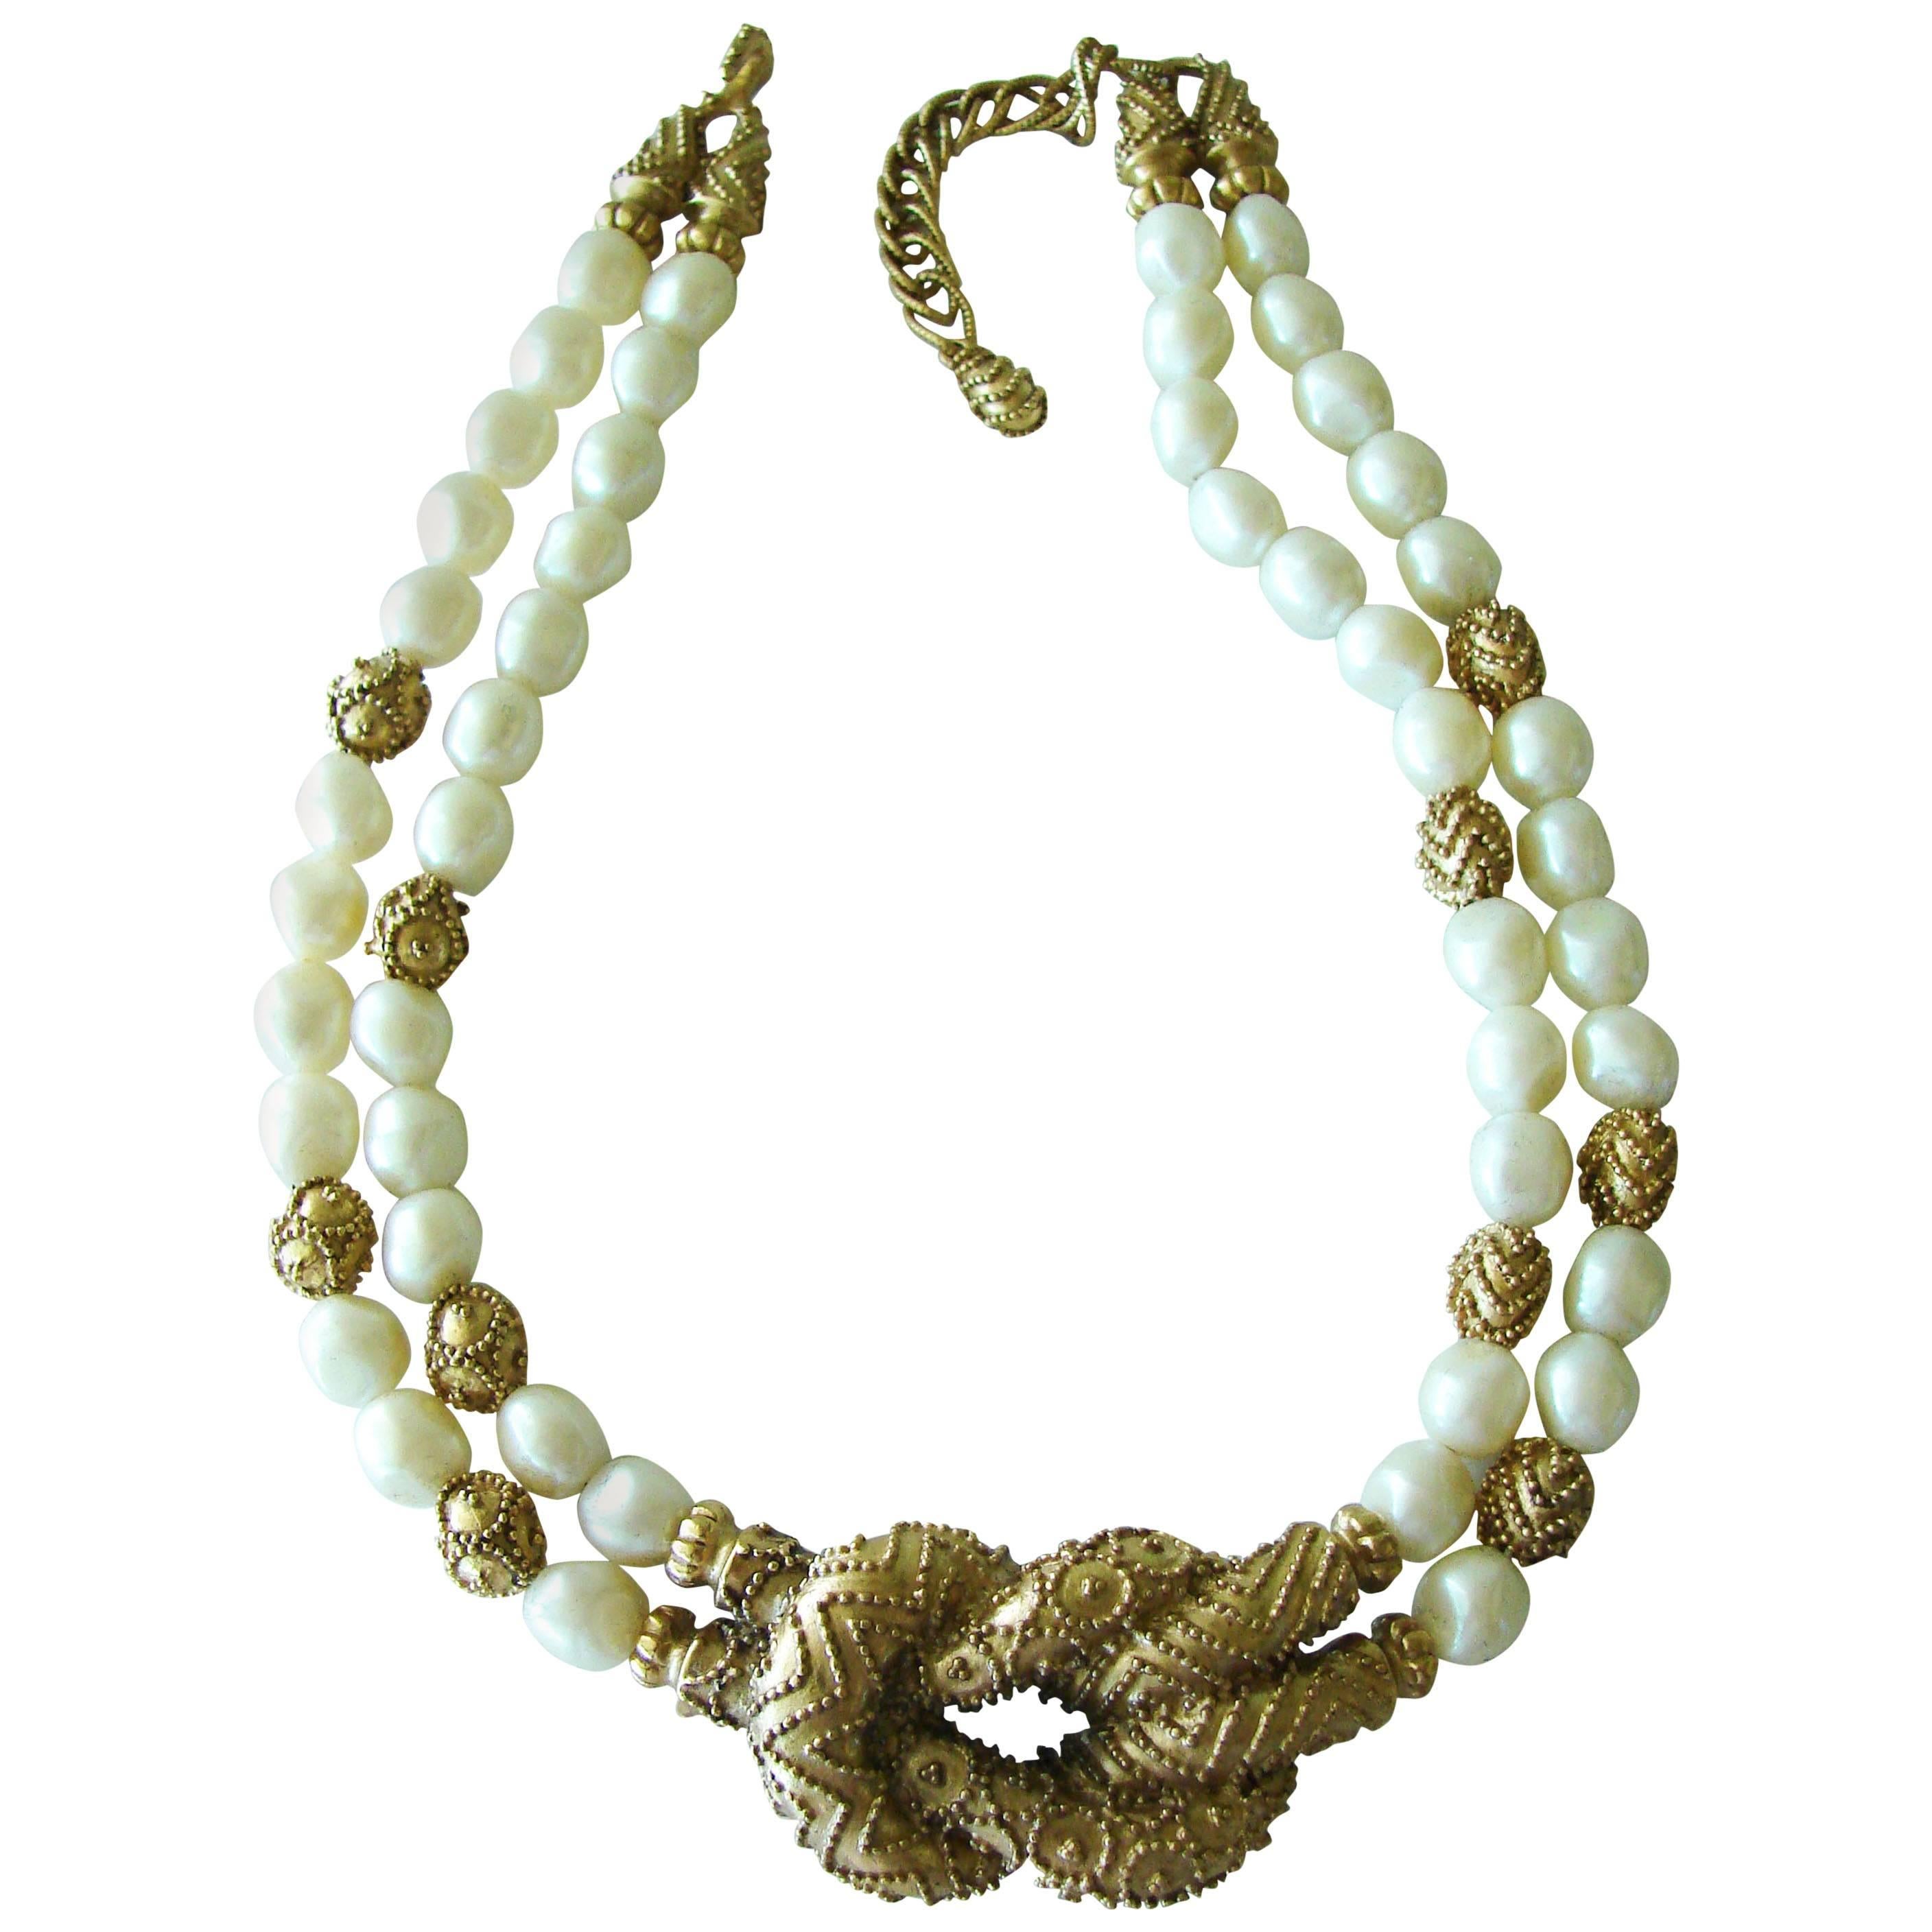 Mary McFadden Etruscan Necklace Faux Pearl Double Strand + Gold Beads + Box 80s